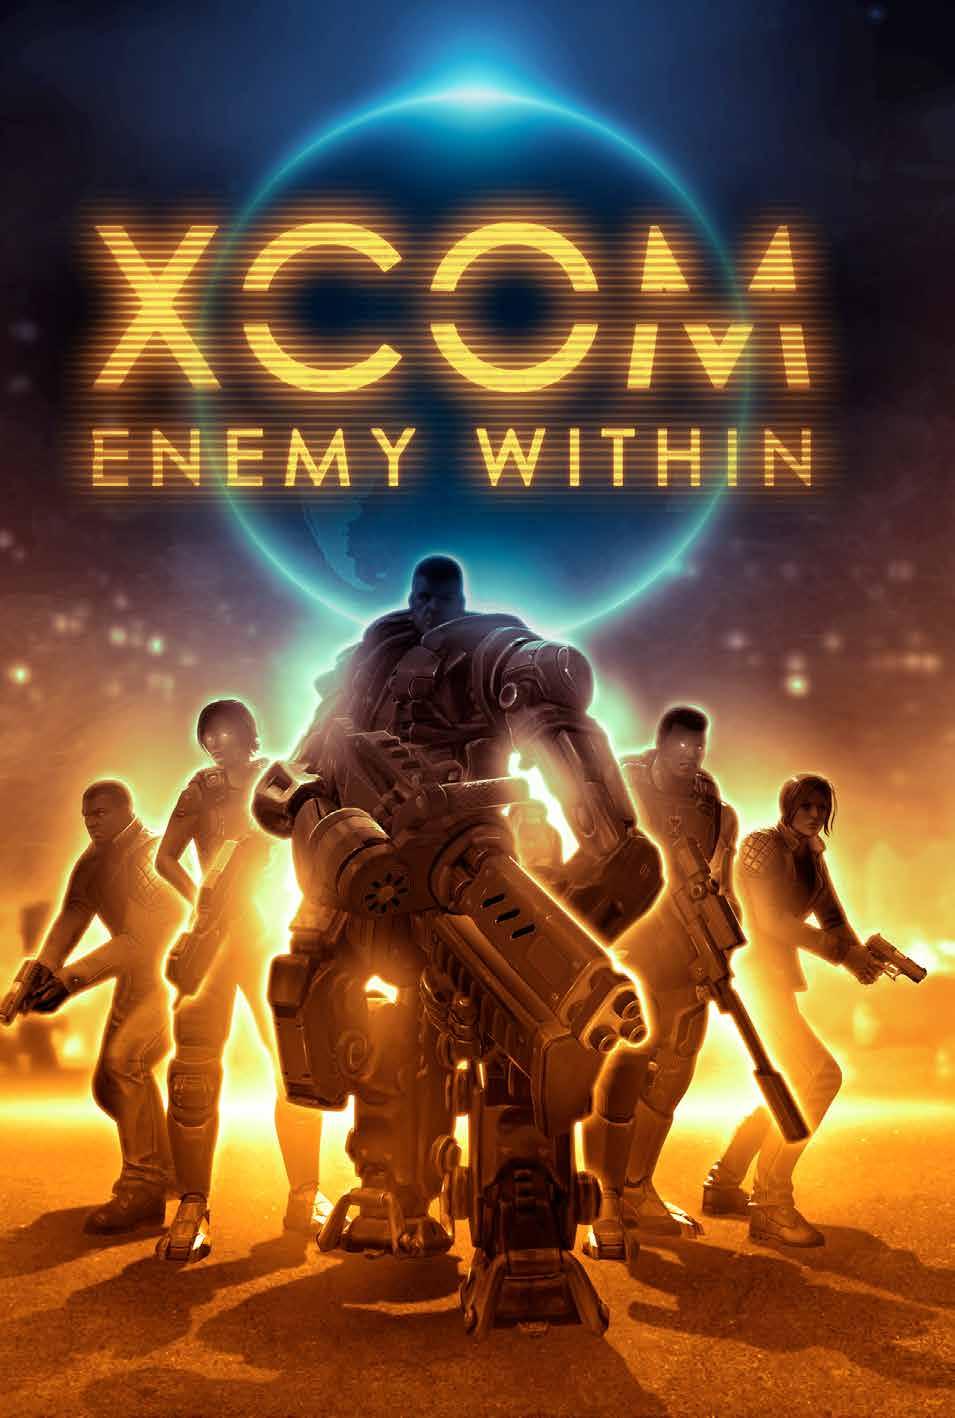 The following content is only available if you have purchased and installed the XCOM: Enemy Within expansion pack. For instructions on how to do this, please see How do I obtain XCOM: Enemy Within?